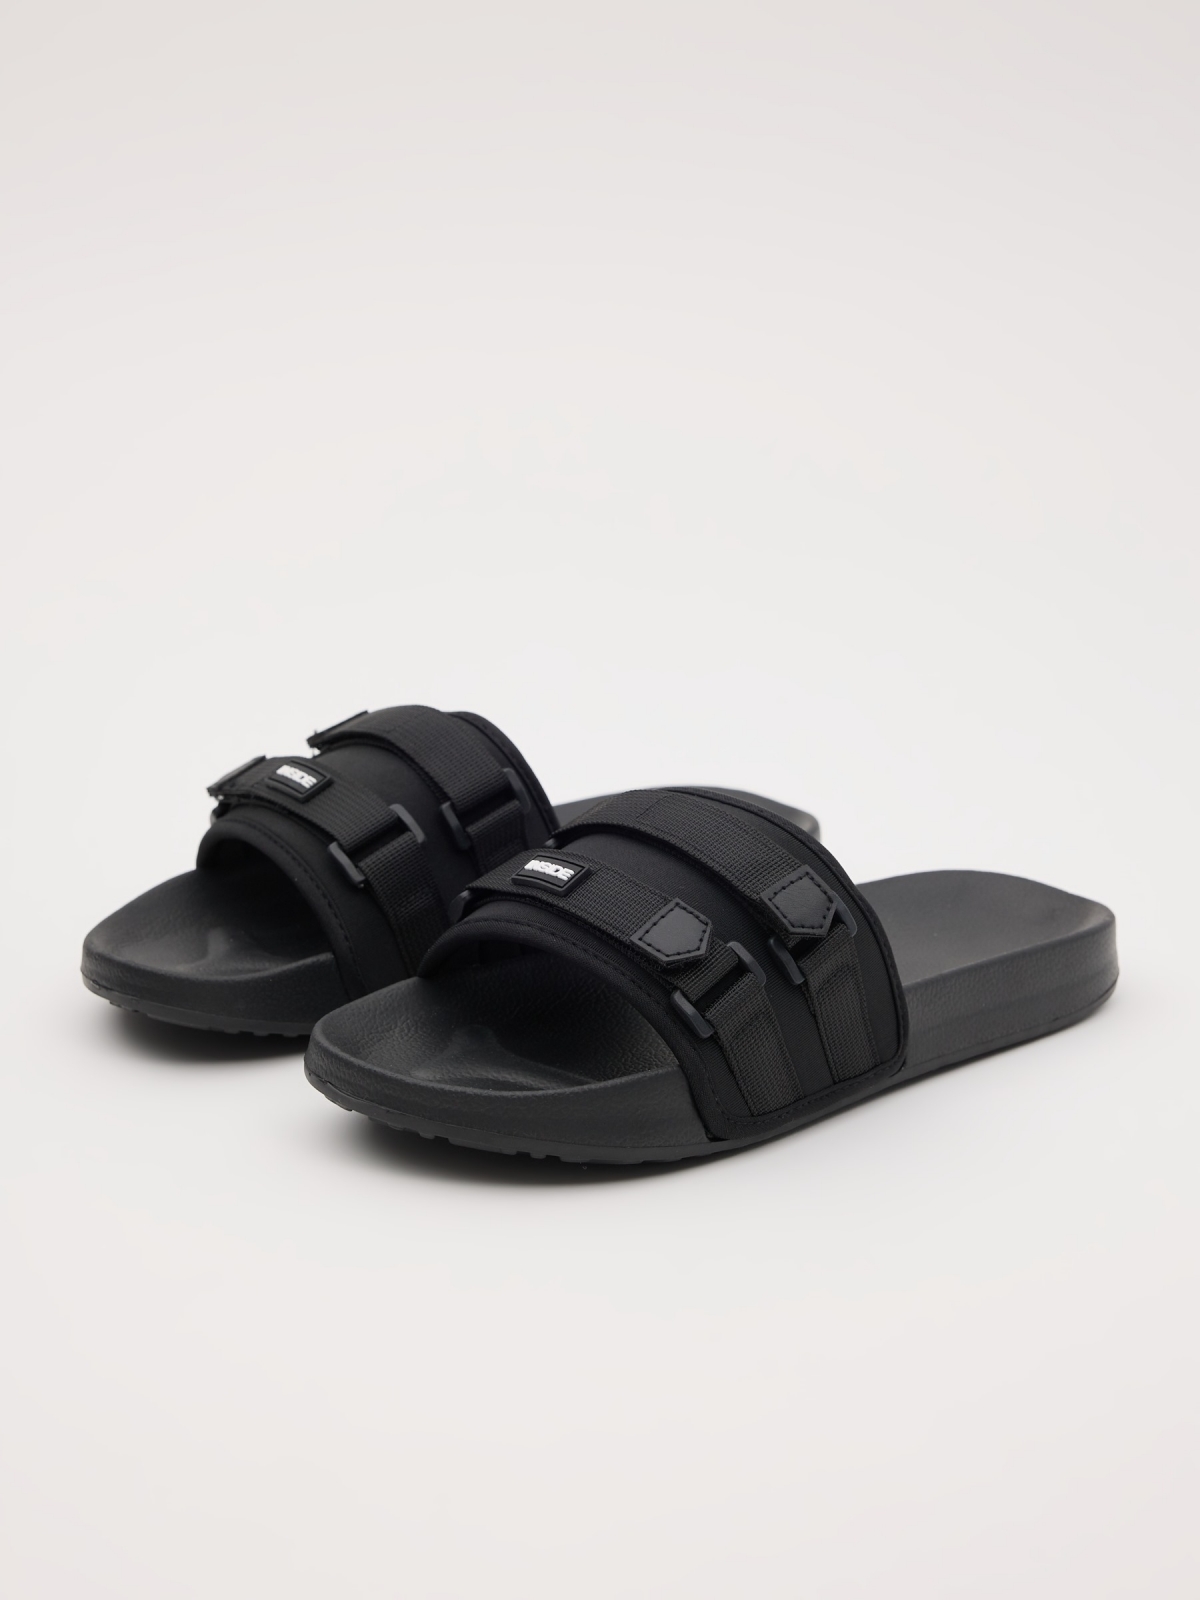 Flip flops with buckle fasteners black 45º front view